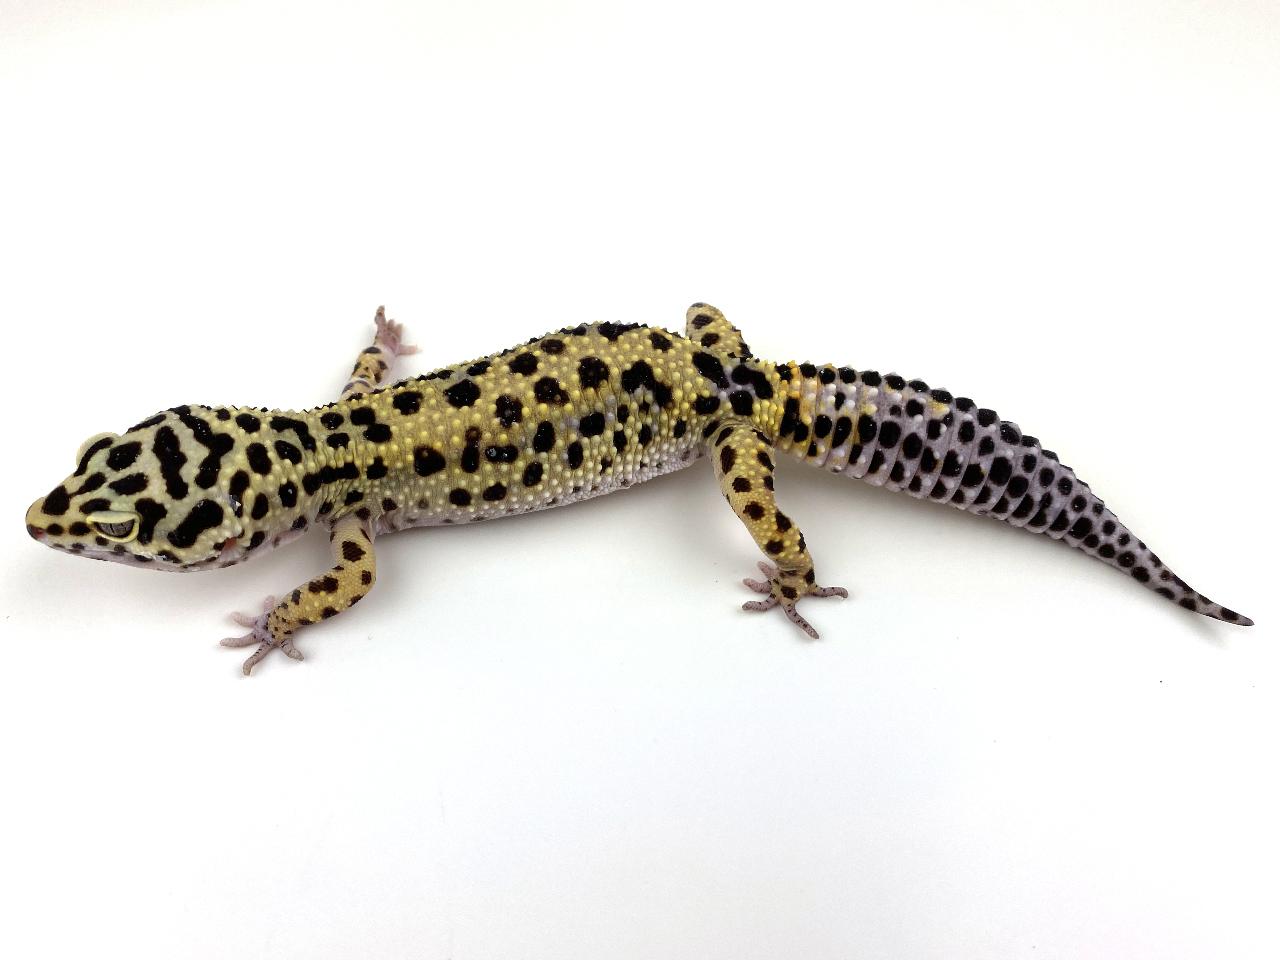 Jungle Leopard Gecko by Royal Constrictor Designs